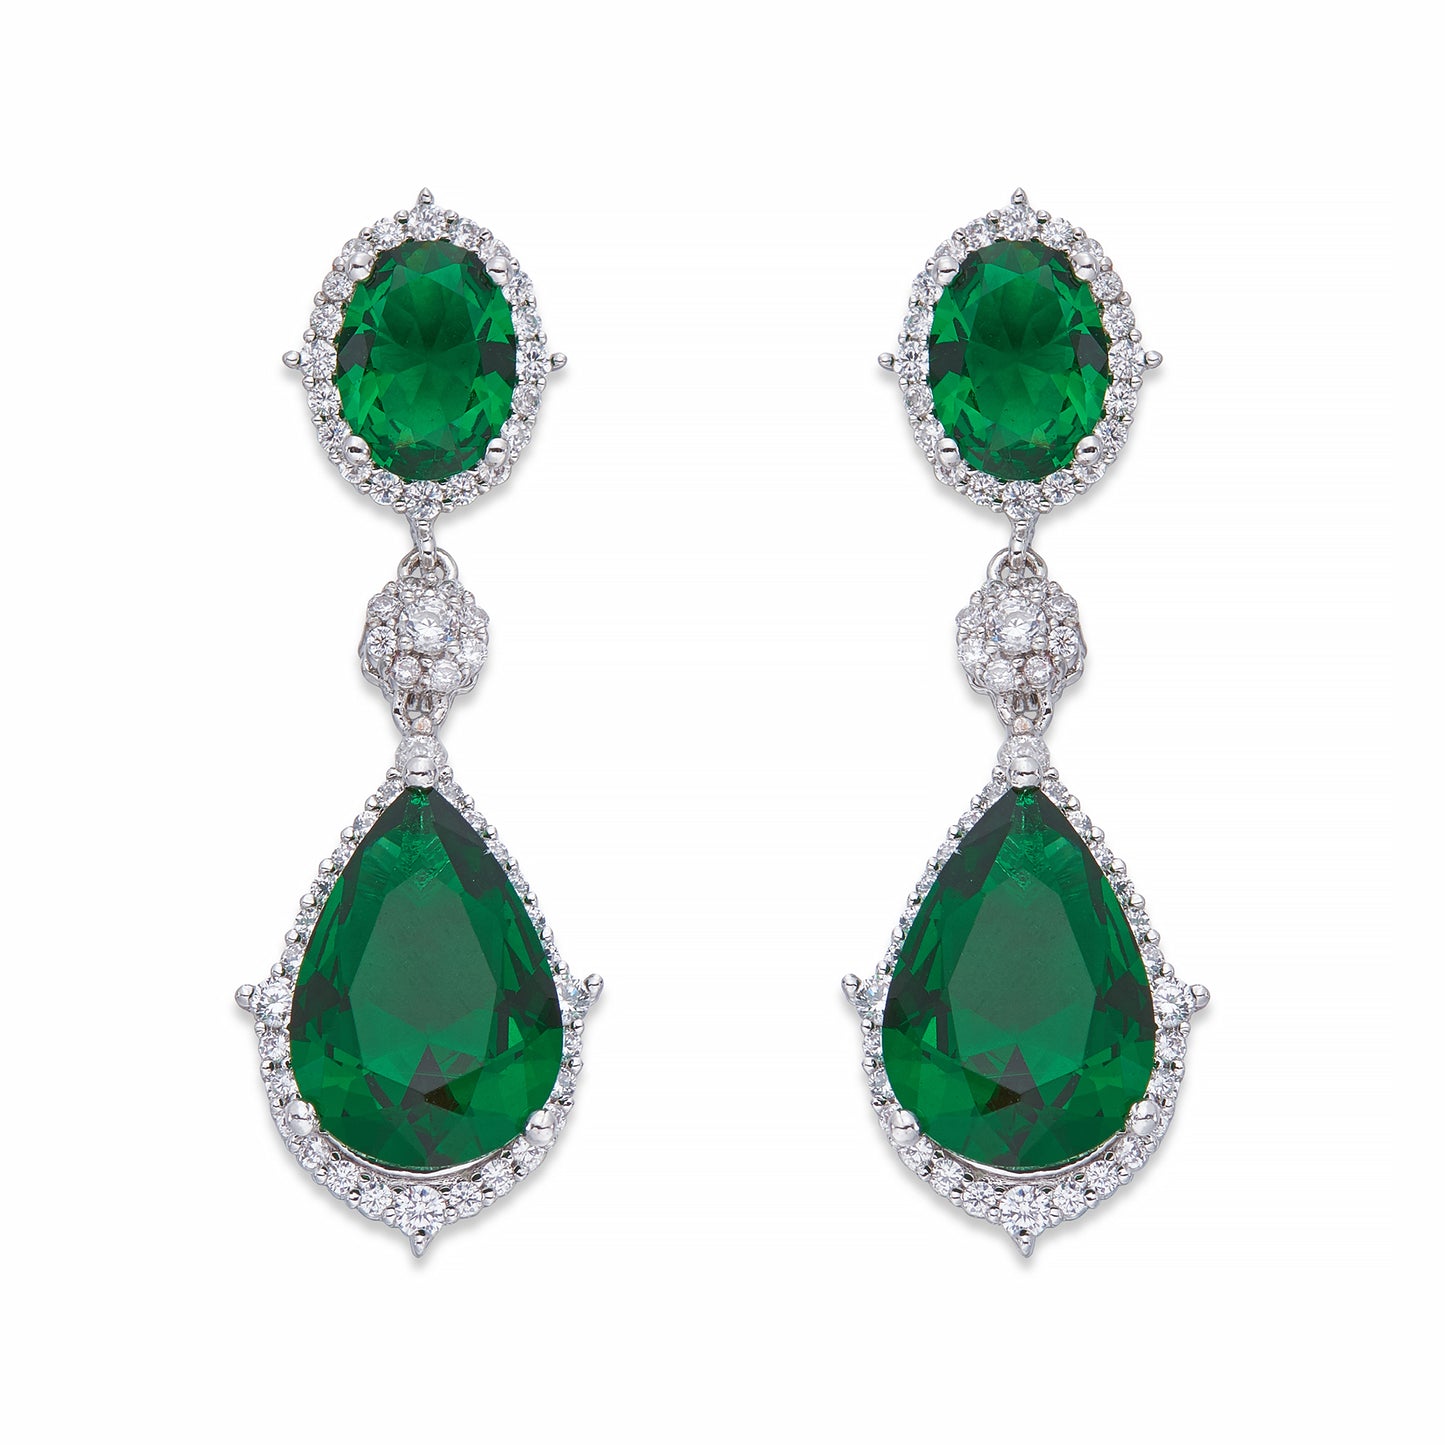 Green Crystals on Silver Dangle Earrings | ${Vendor}